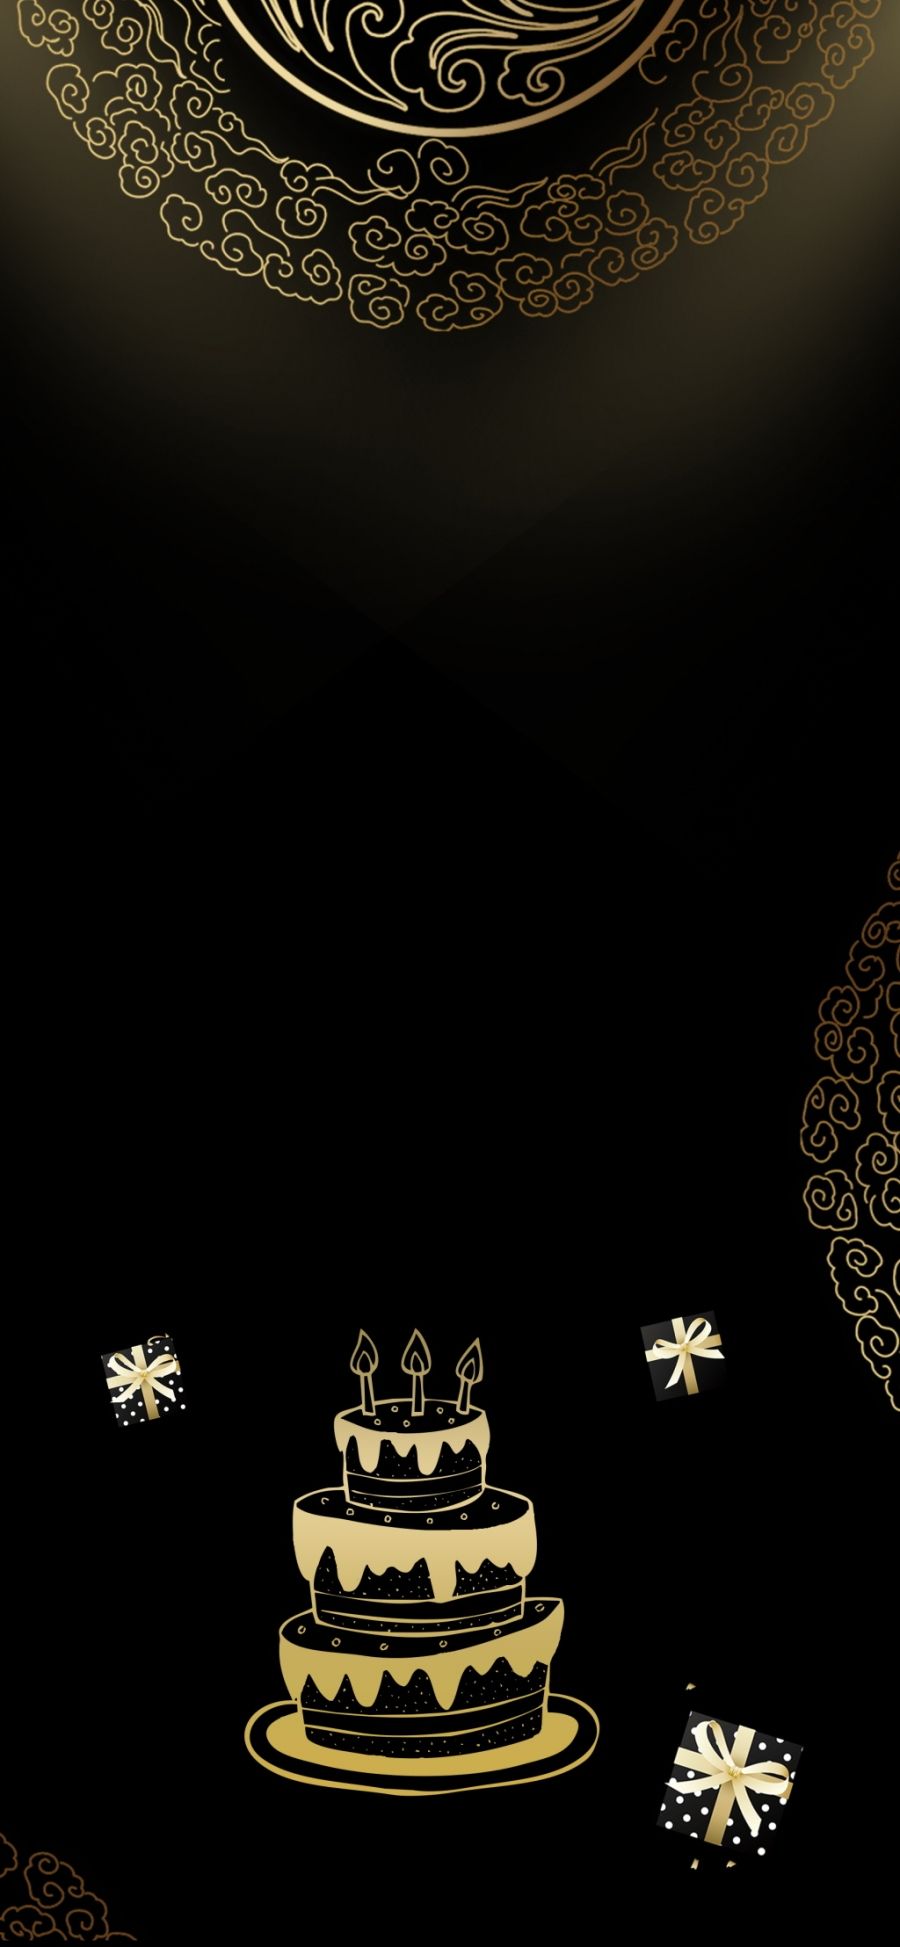 A black background with gold decorations and cake - Birthday